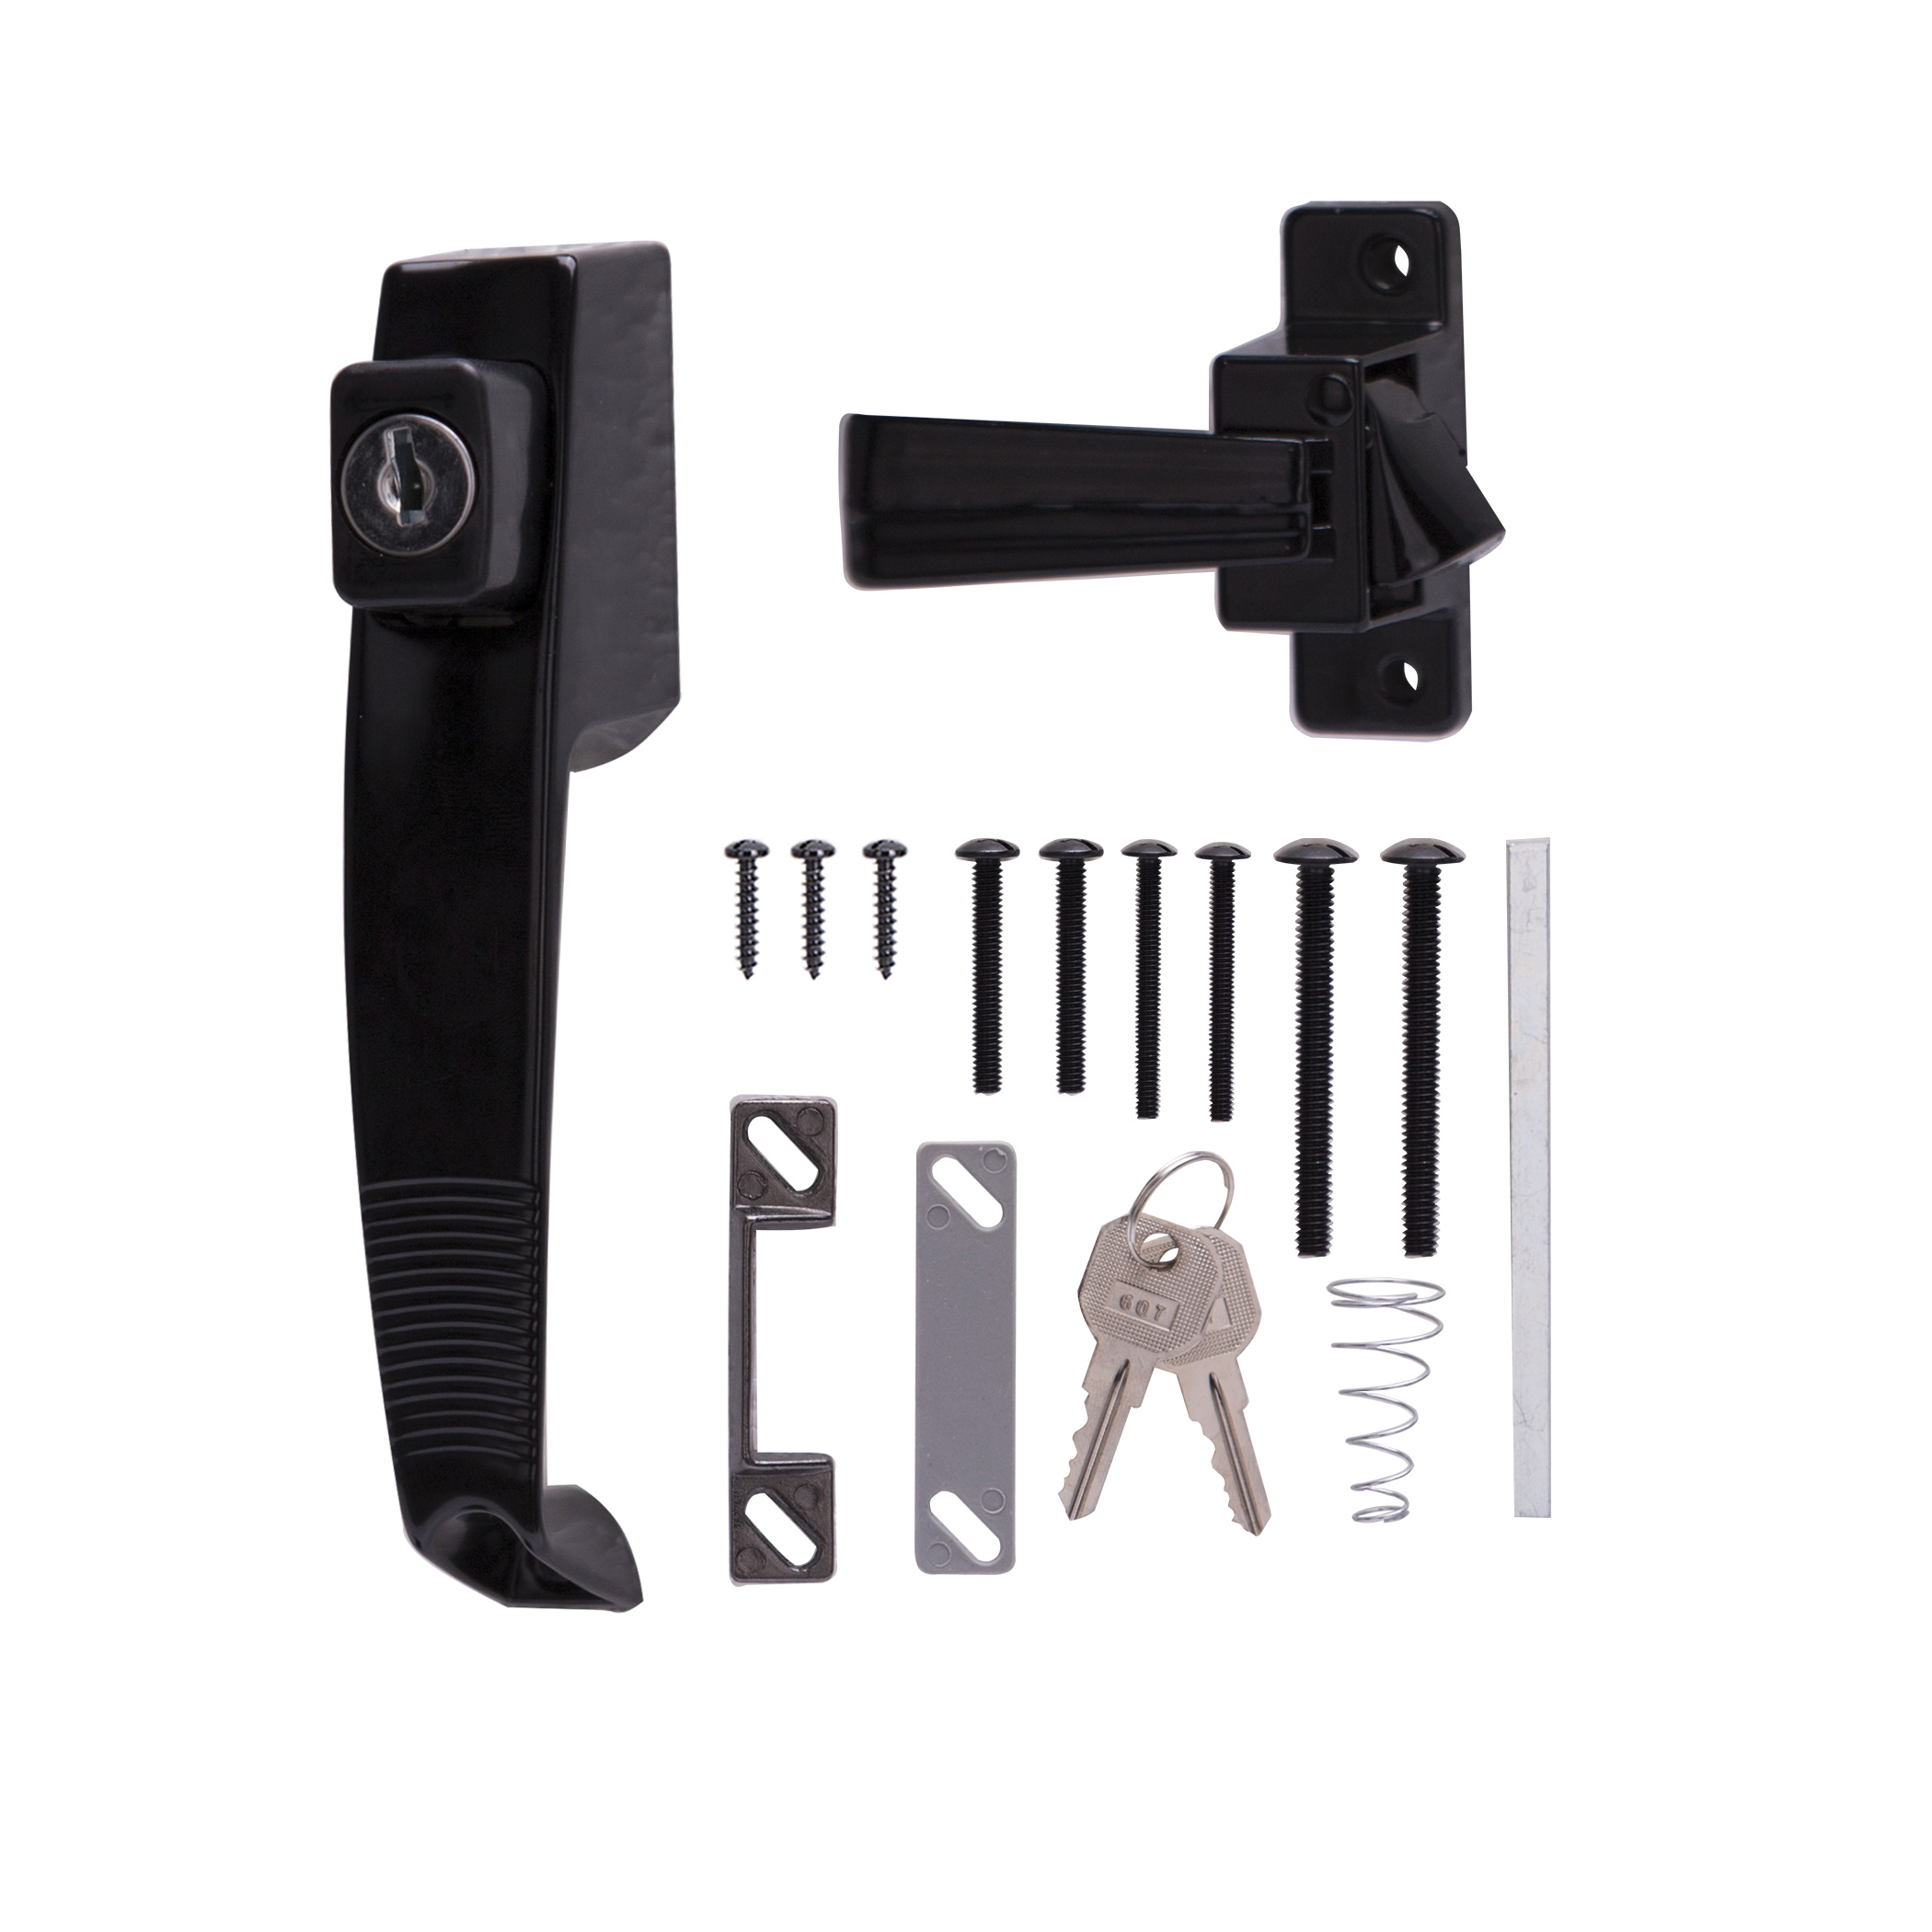 47020-UK-PS Pushbutton Latch, Zinc, Black, 5/8 to 1-1/2 in Thick Door, 5/8 in Backset, 5-7/8 in Lever/Knob